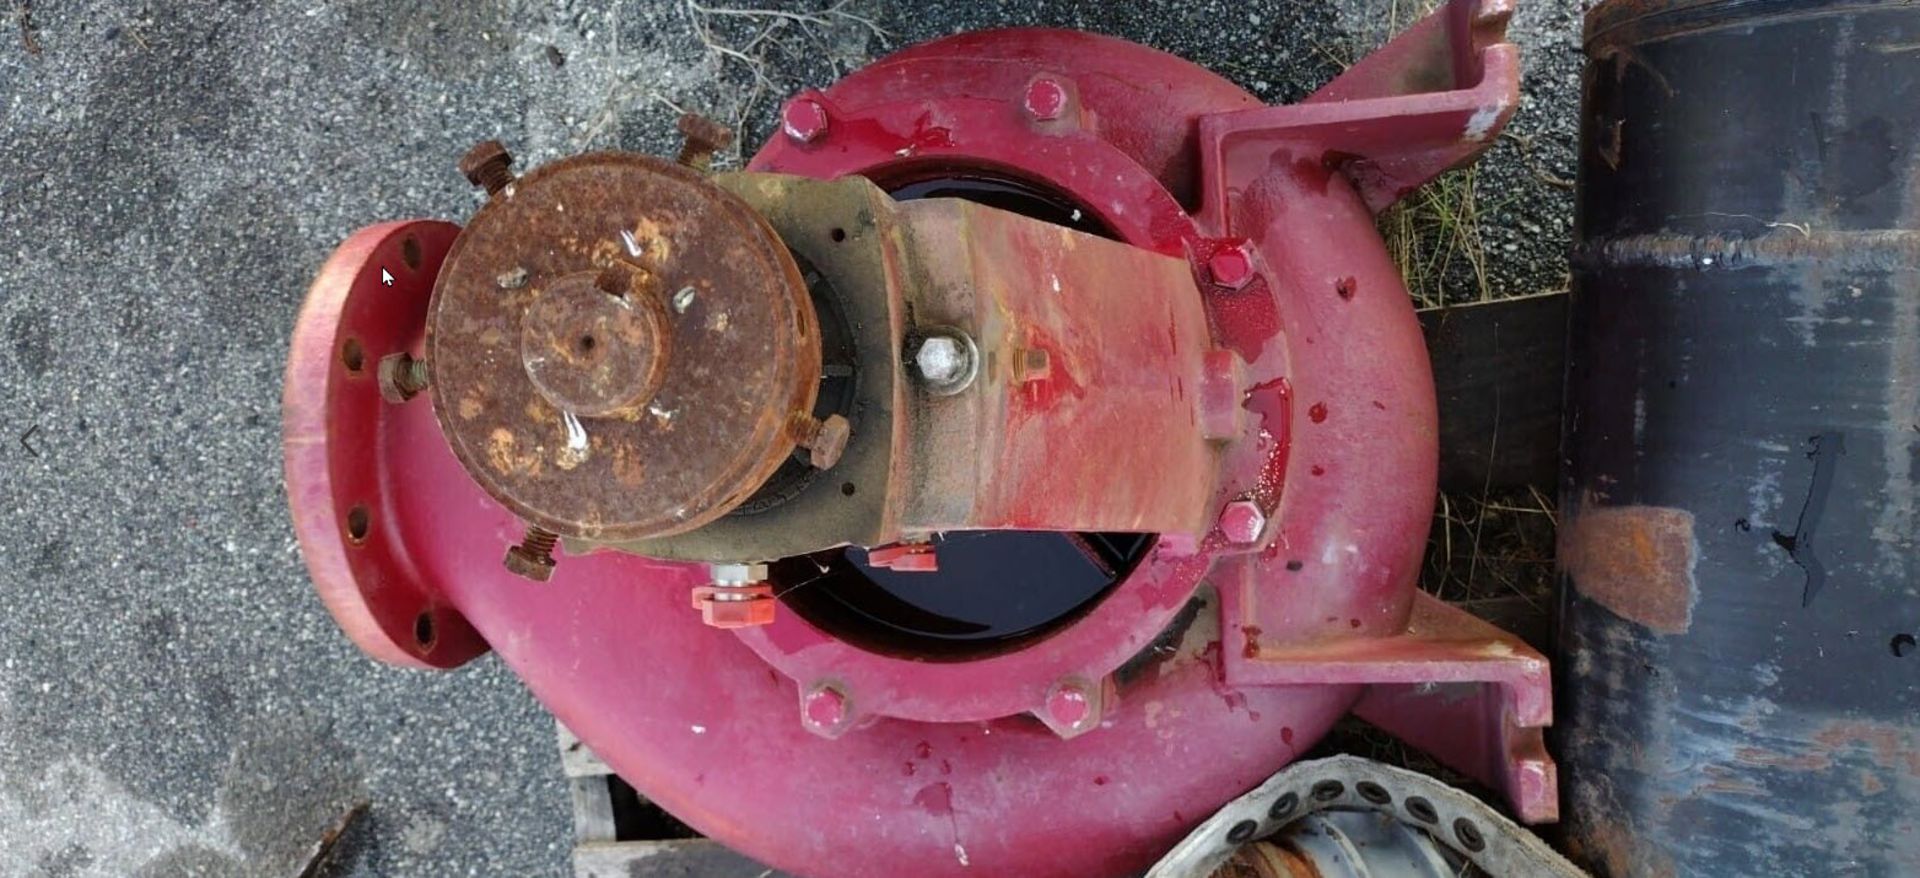 (Located in Hollister, CA) 8 in. Water Pump Complete, Rigging Fee: $100 - Image 4 of 8